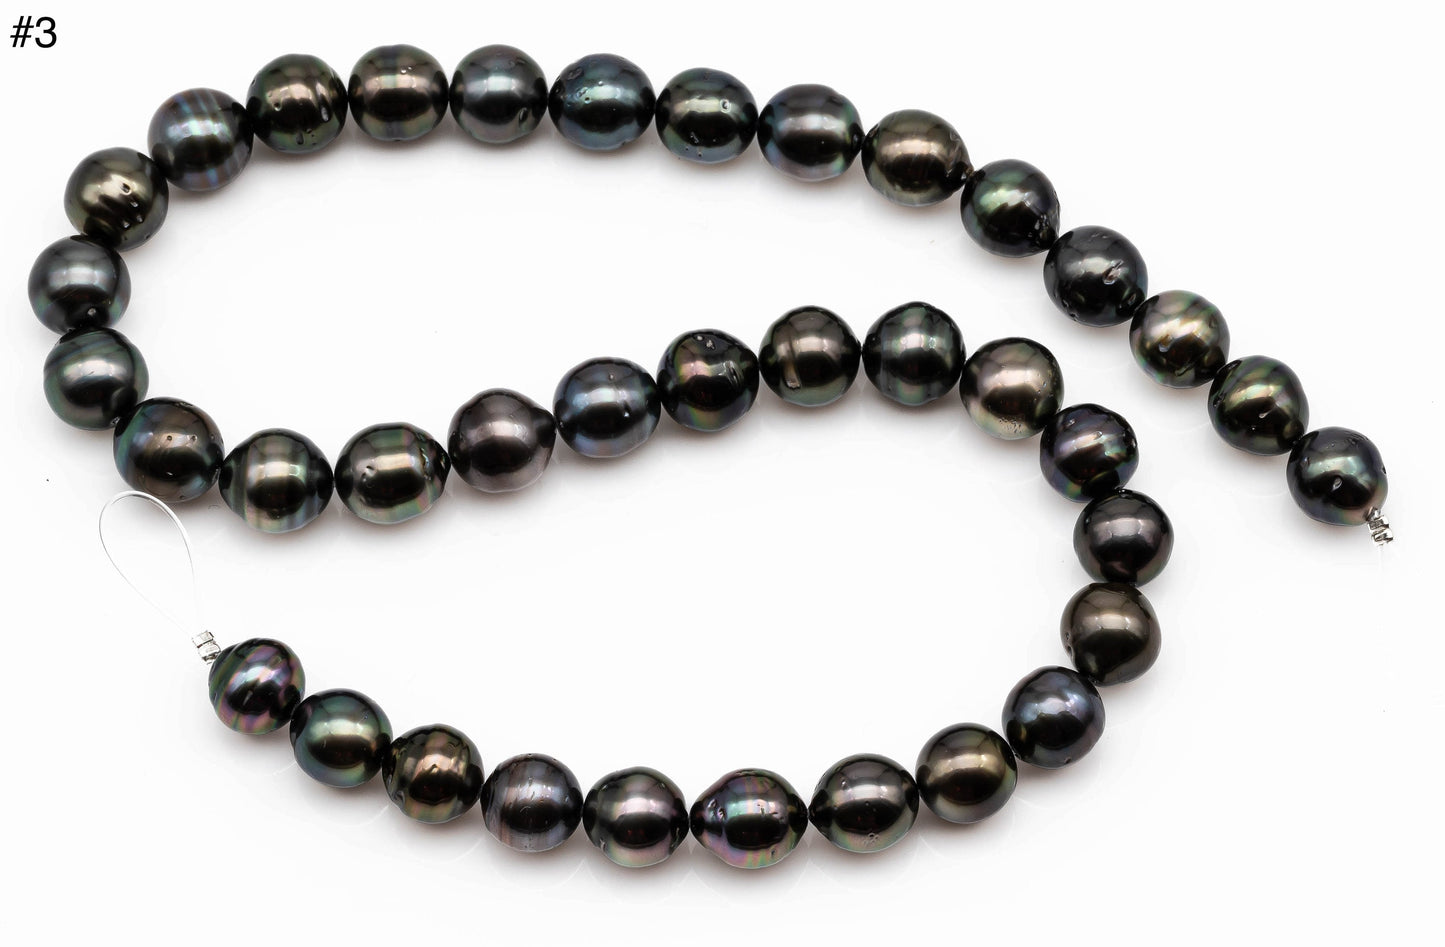 Full Strand Tahitian Pearl Near Round with High Luster and Blemishes, Natural Dark Color Pearl Bead for Making Jewelry, 10-11mm, SKU#1096TH